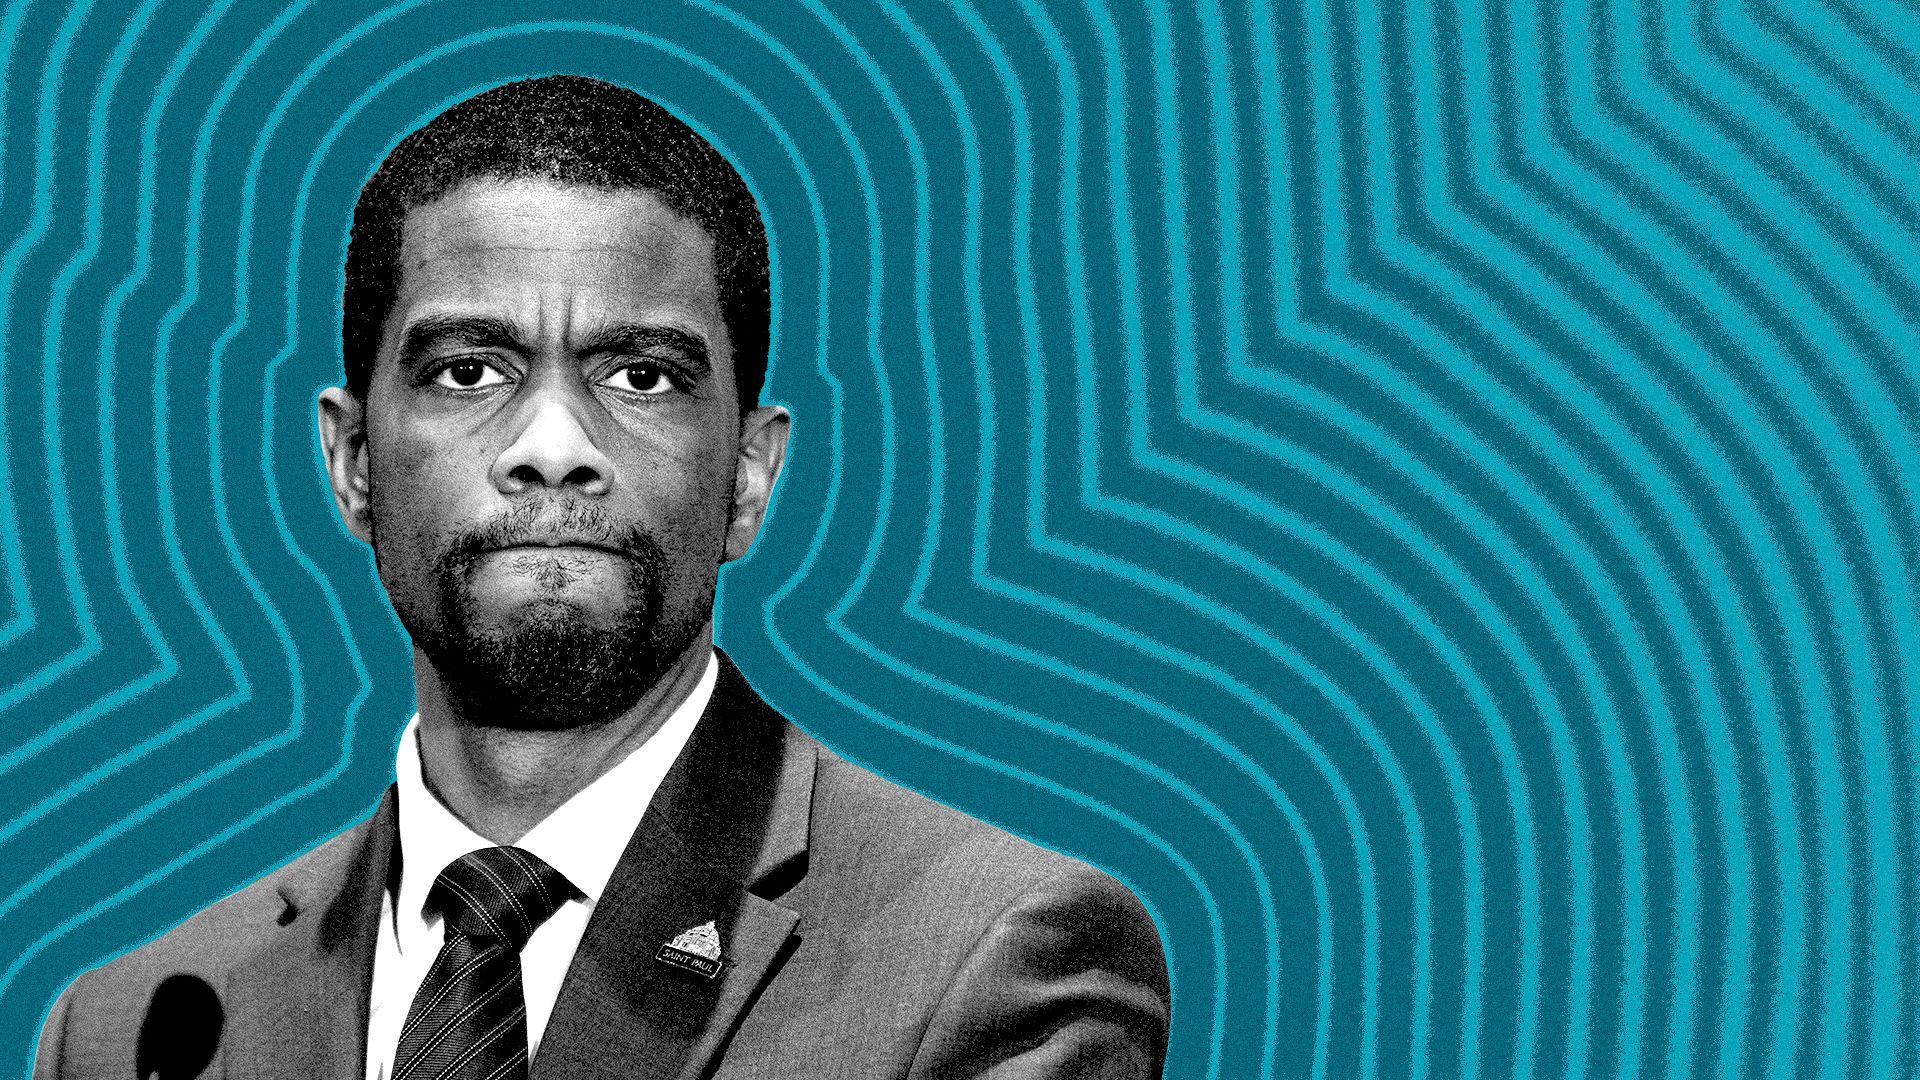 Photo illustration of St. Paul Mayor Melvin Carter with lines radiating from him. 